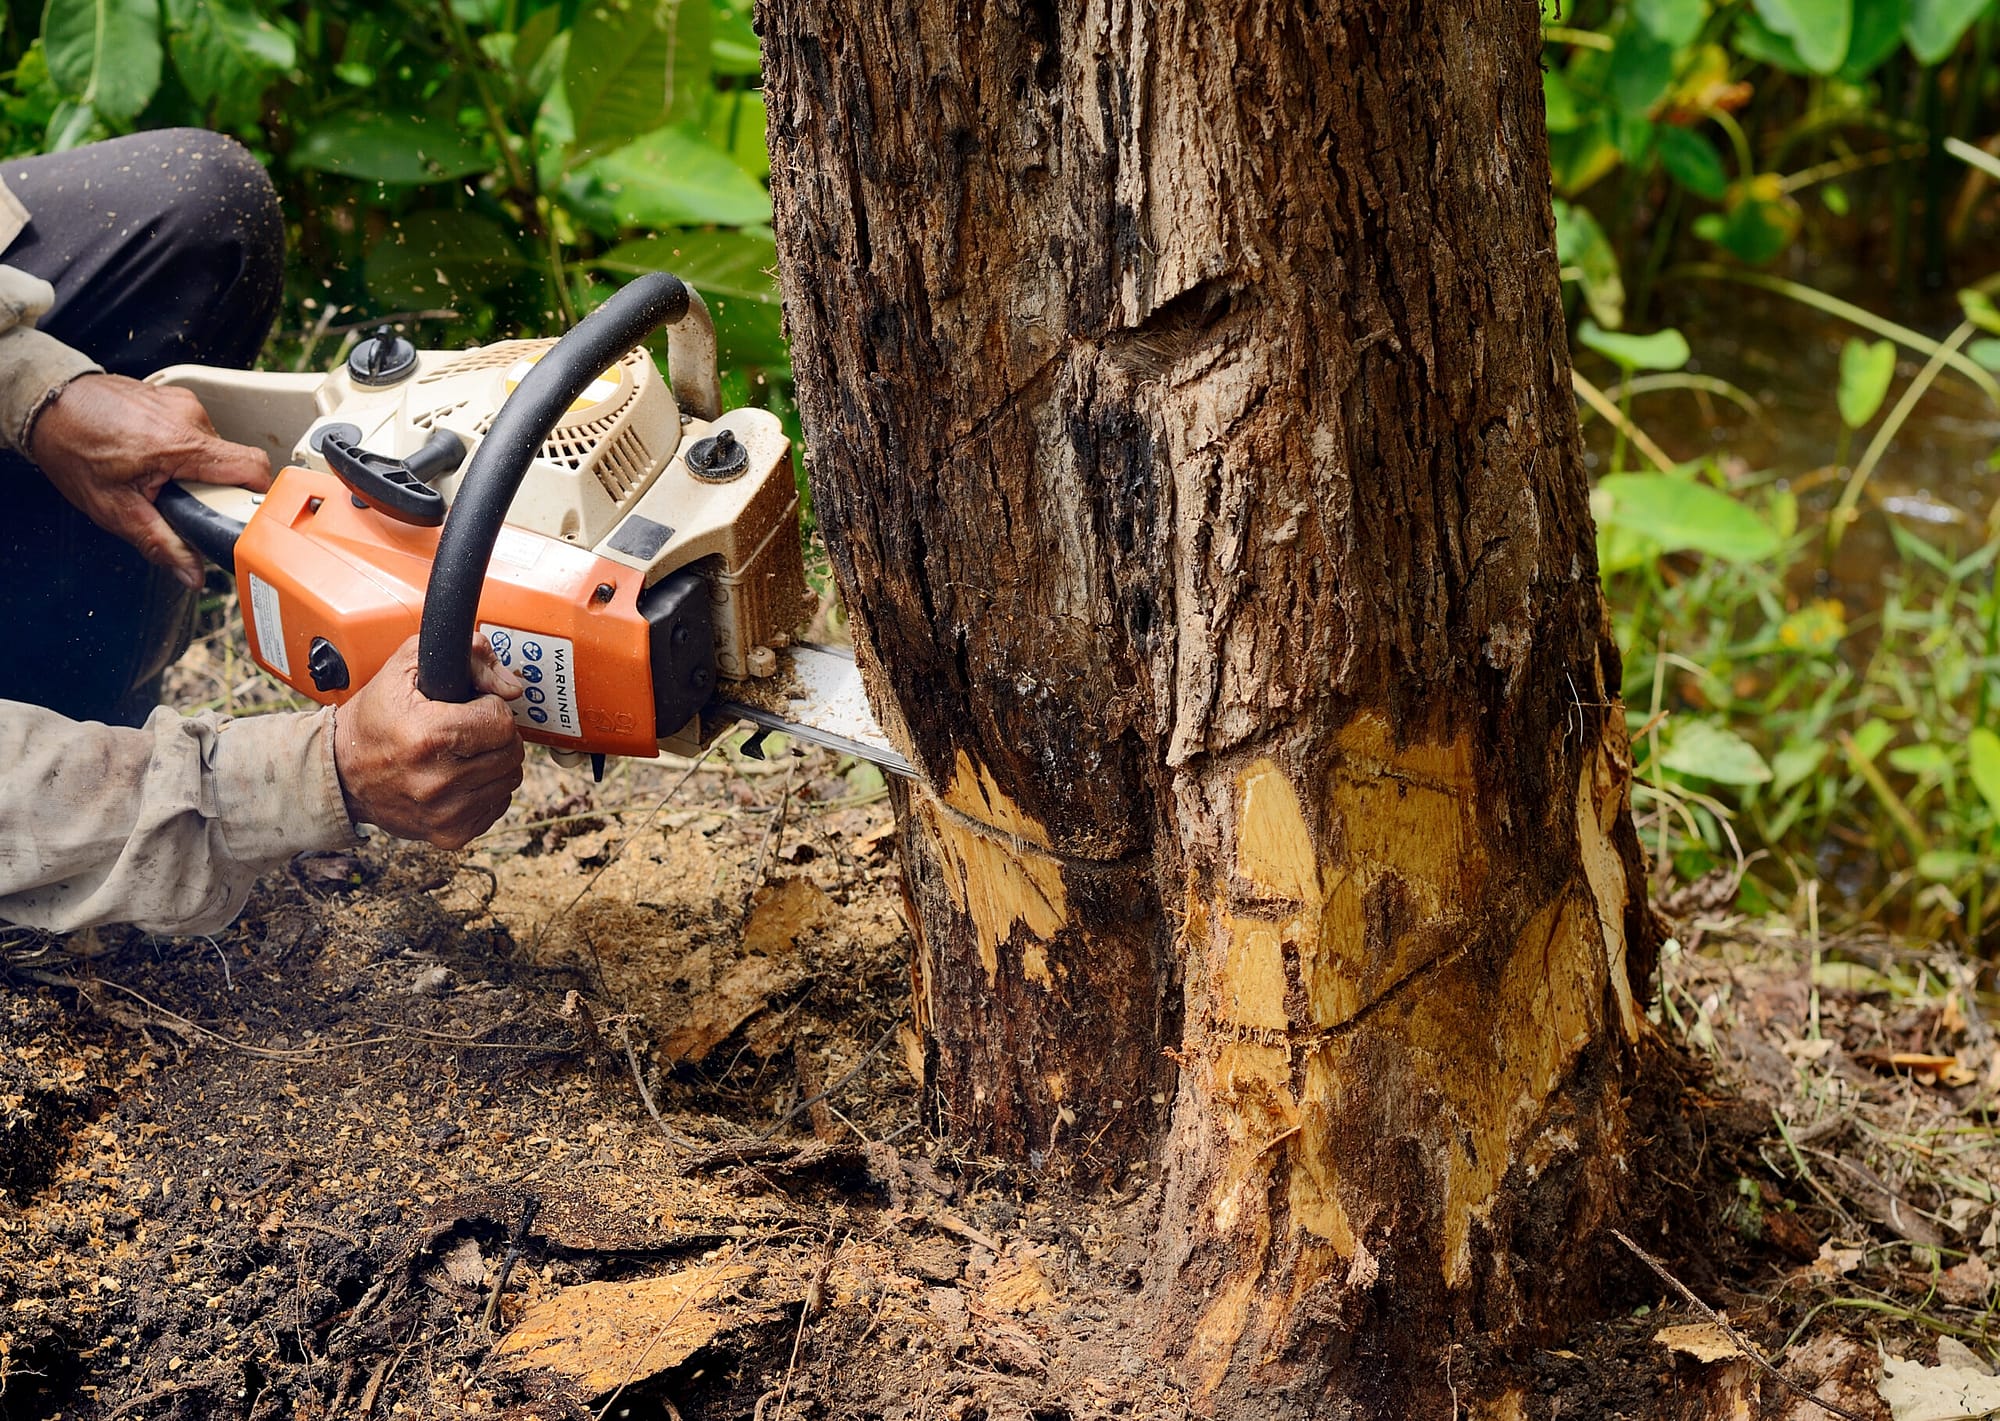 A chain saw cuts into a tree - Just as a chainsaw clears away excess growth, a streamlined marketing campaign filters through the noise to highlight your brand's unique offerings